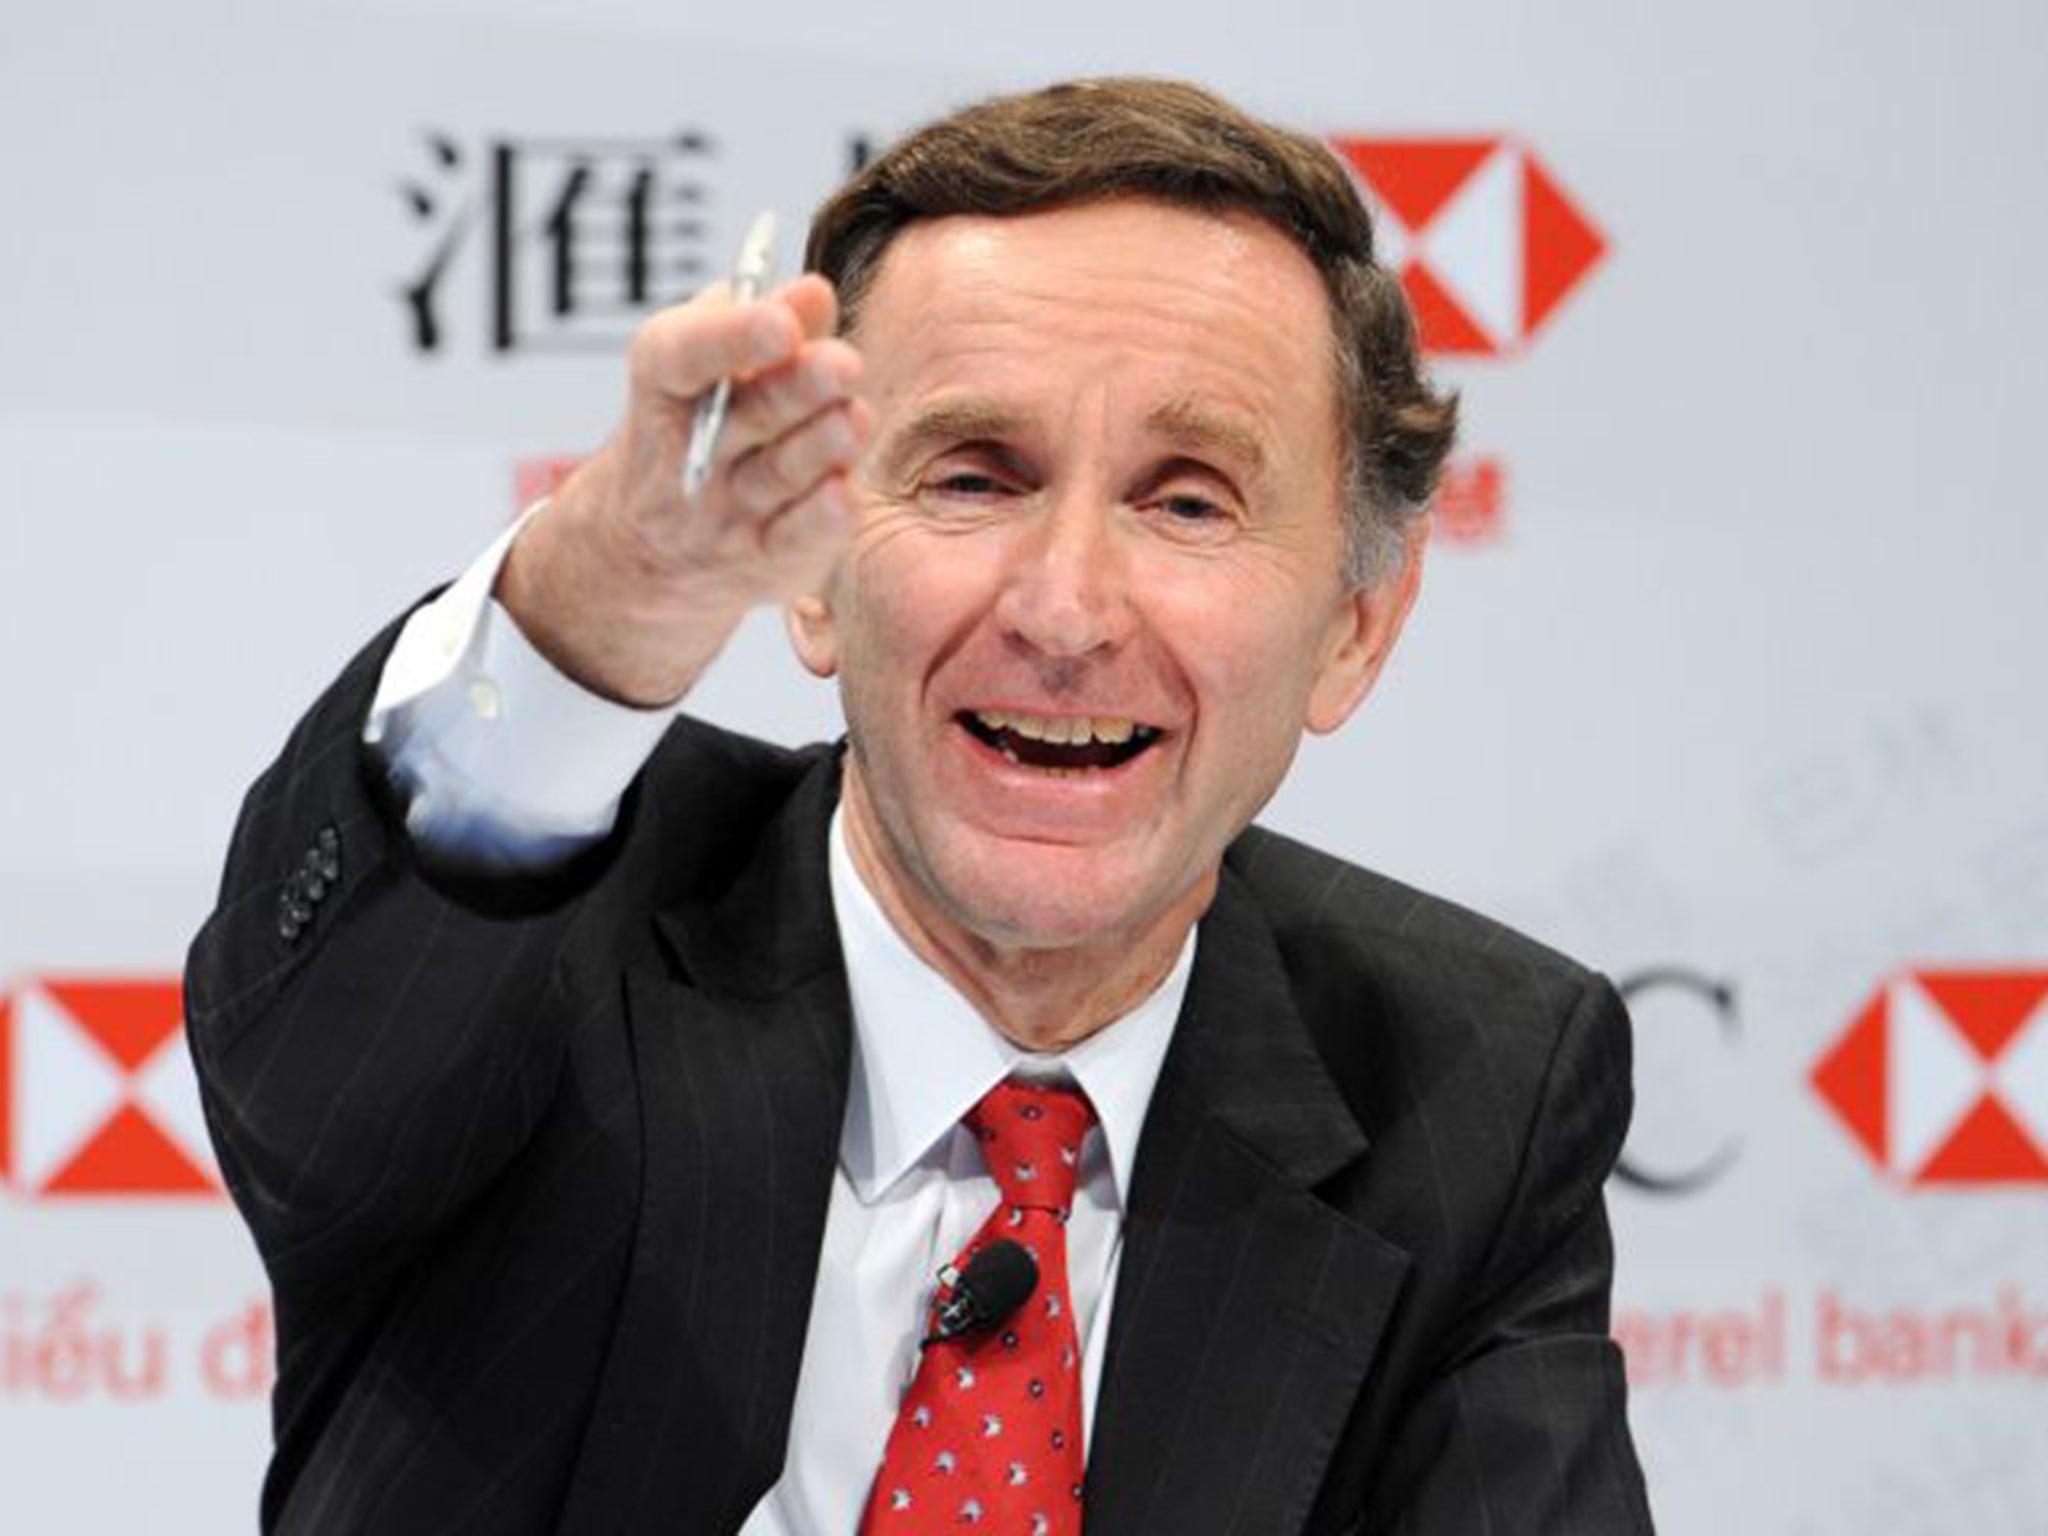 Stephen Green, former chief executive of HSBC, was made a Conservative life peer in 2010 (AFP/Getty)